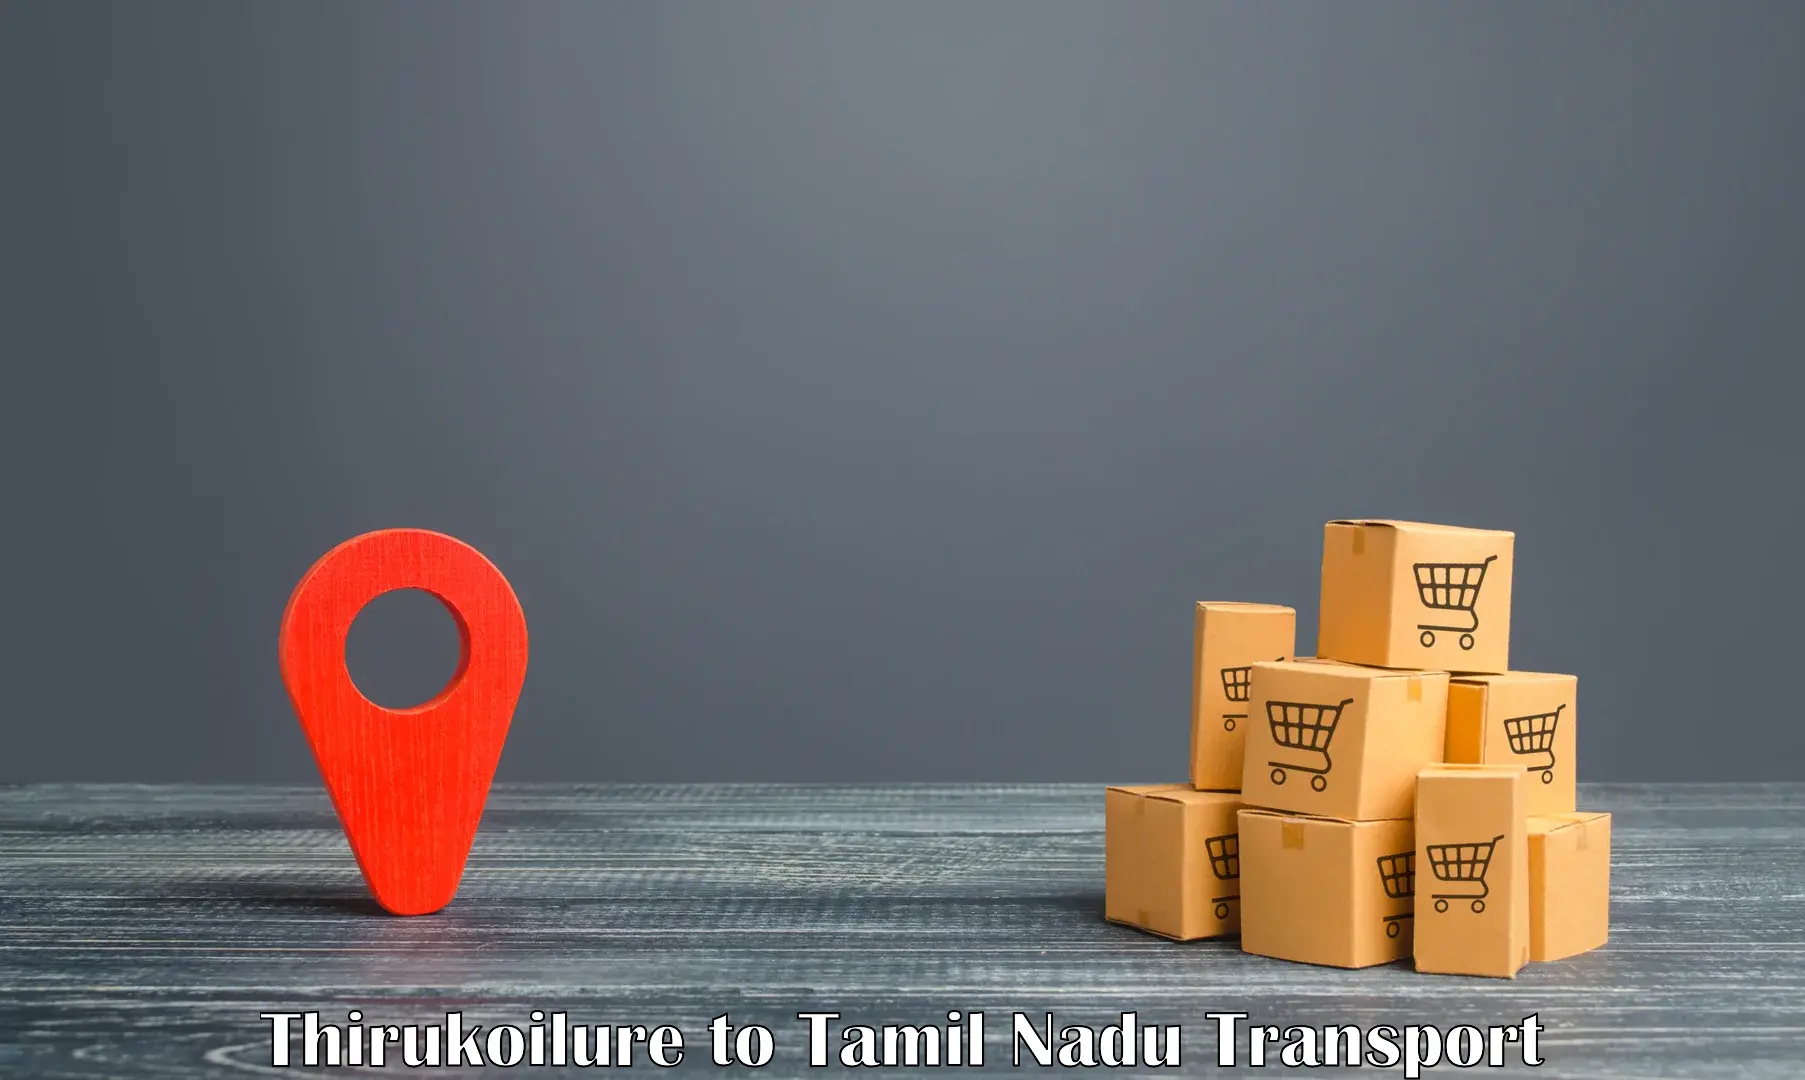 Container transportation services Thirukoilure to Tamil Nadu Veterinary and Animal Sciences University Chennai